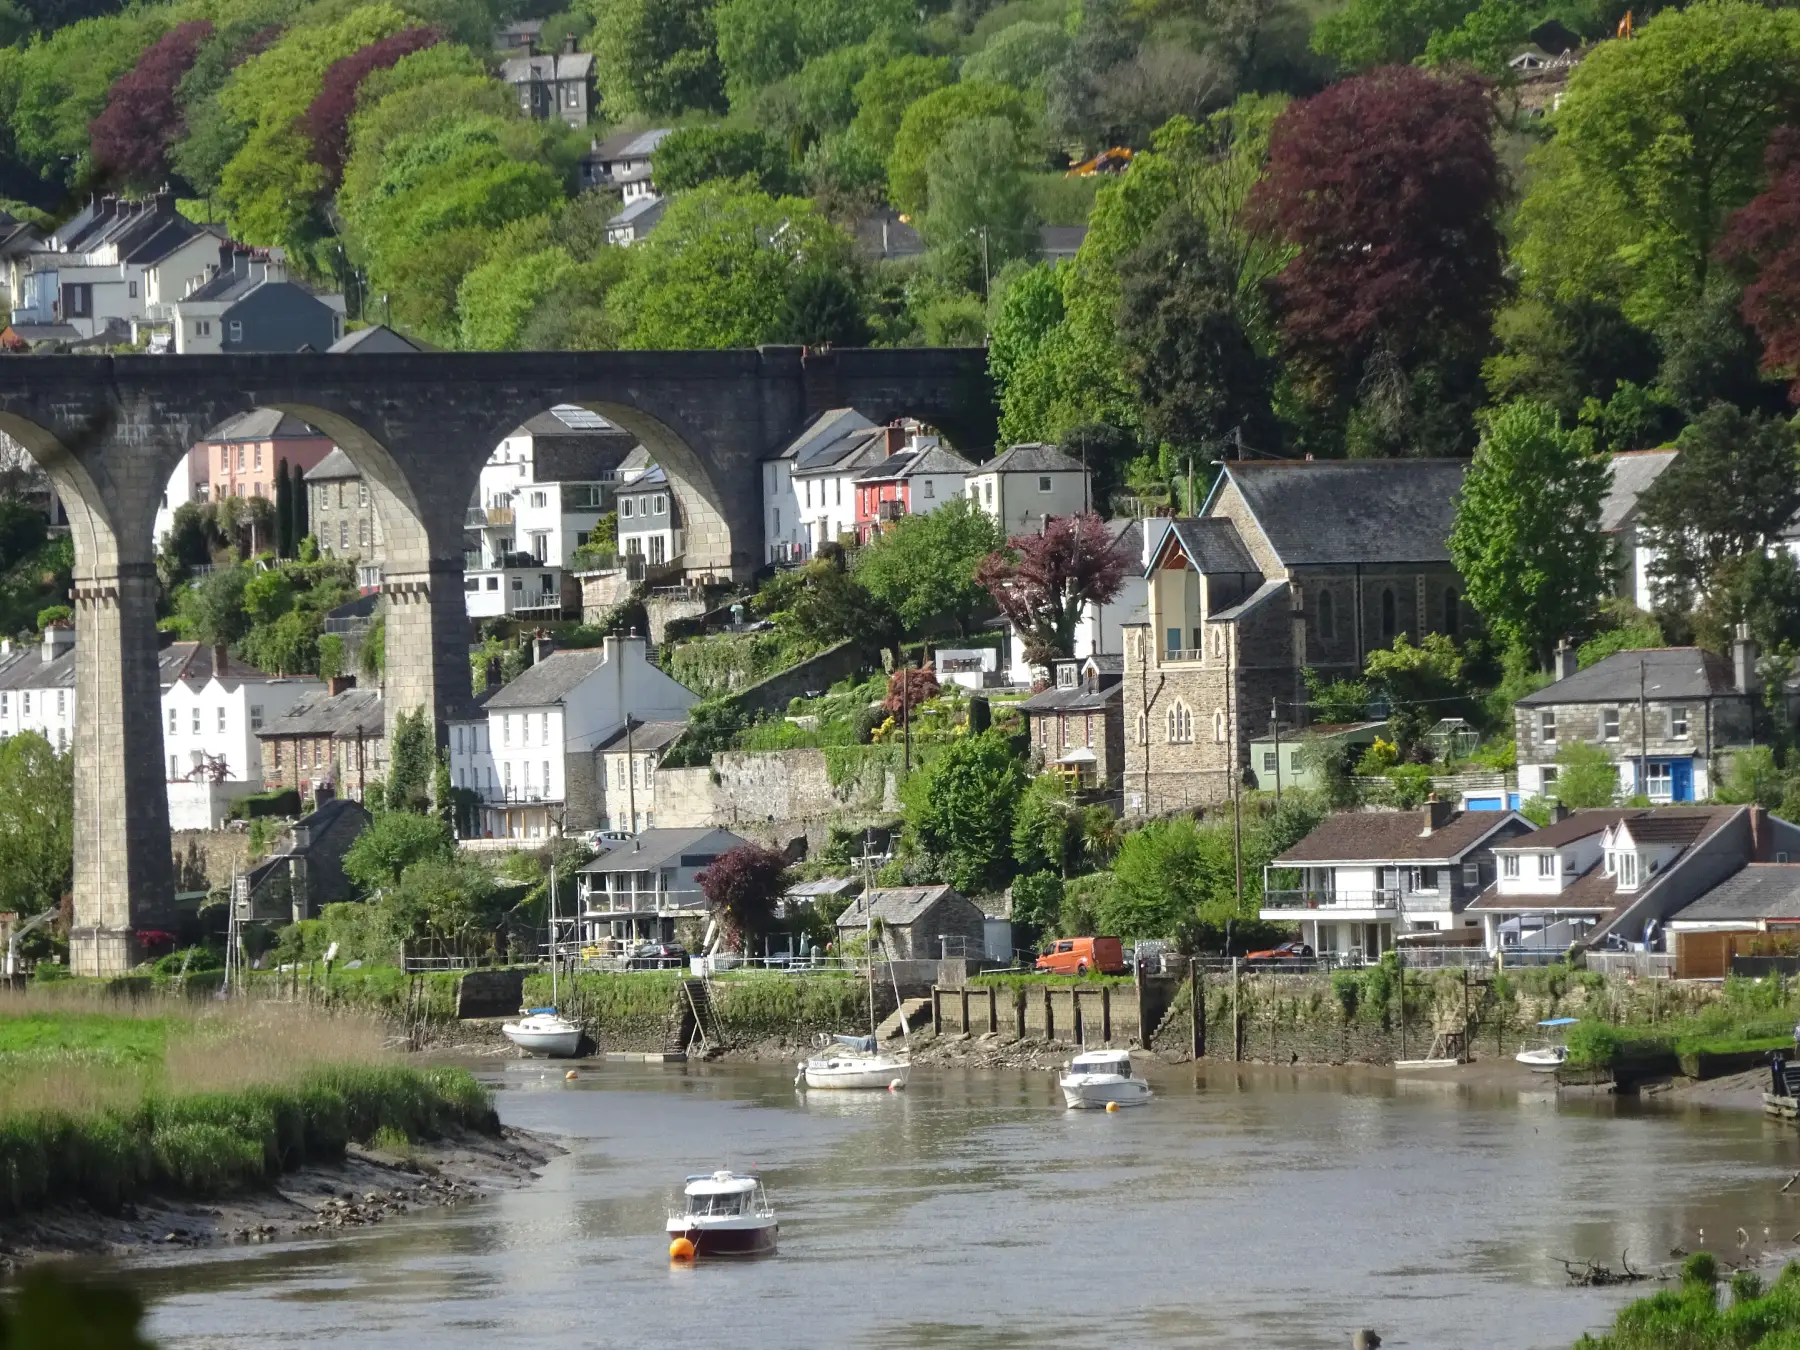 View towards Calstock and the magnificent railway viaduct